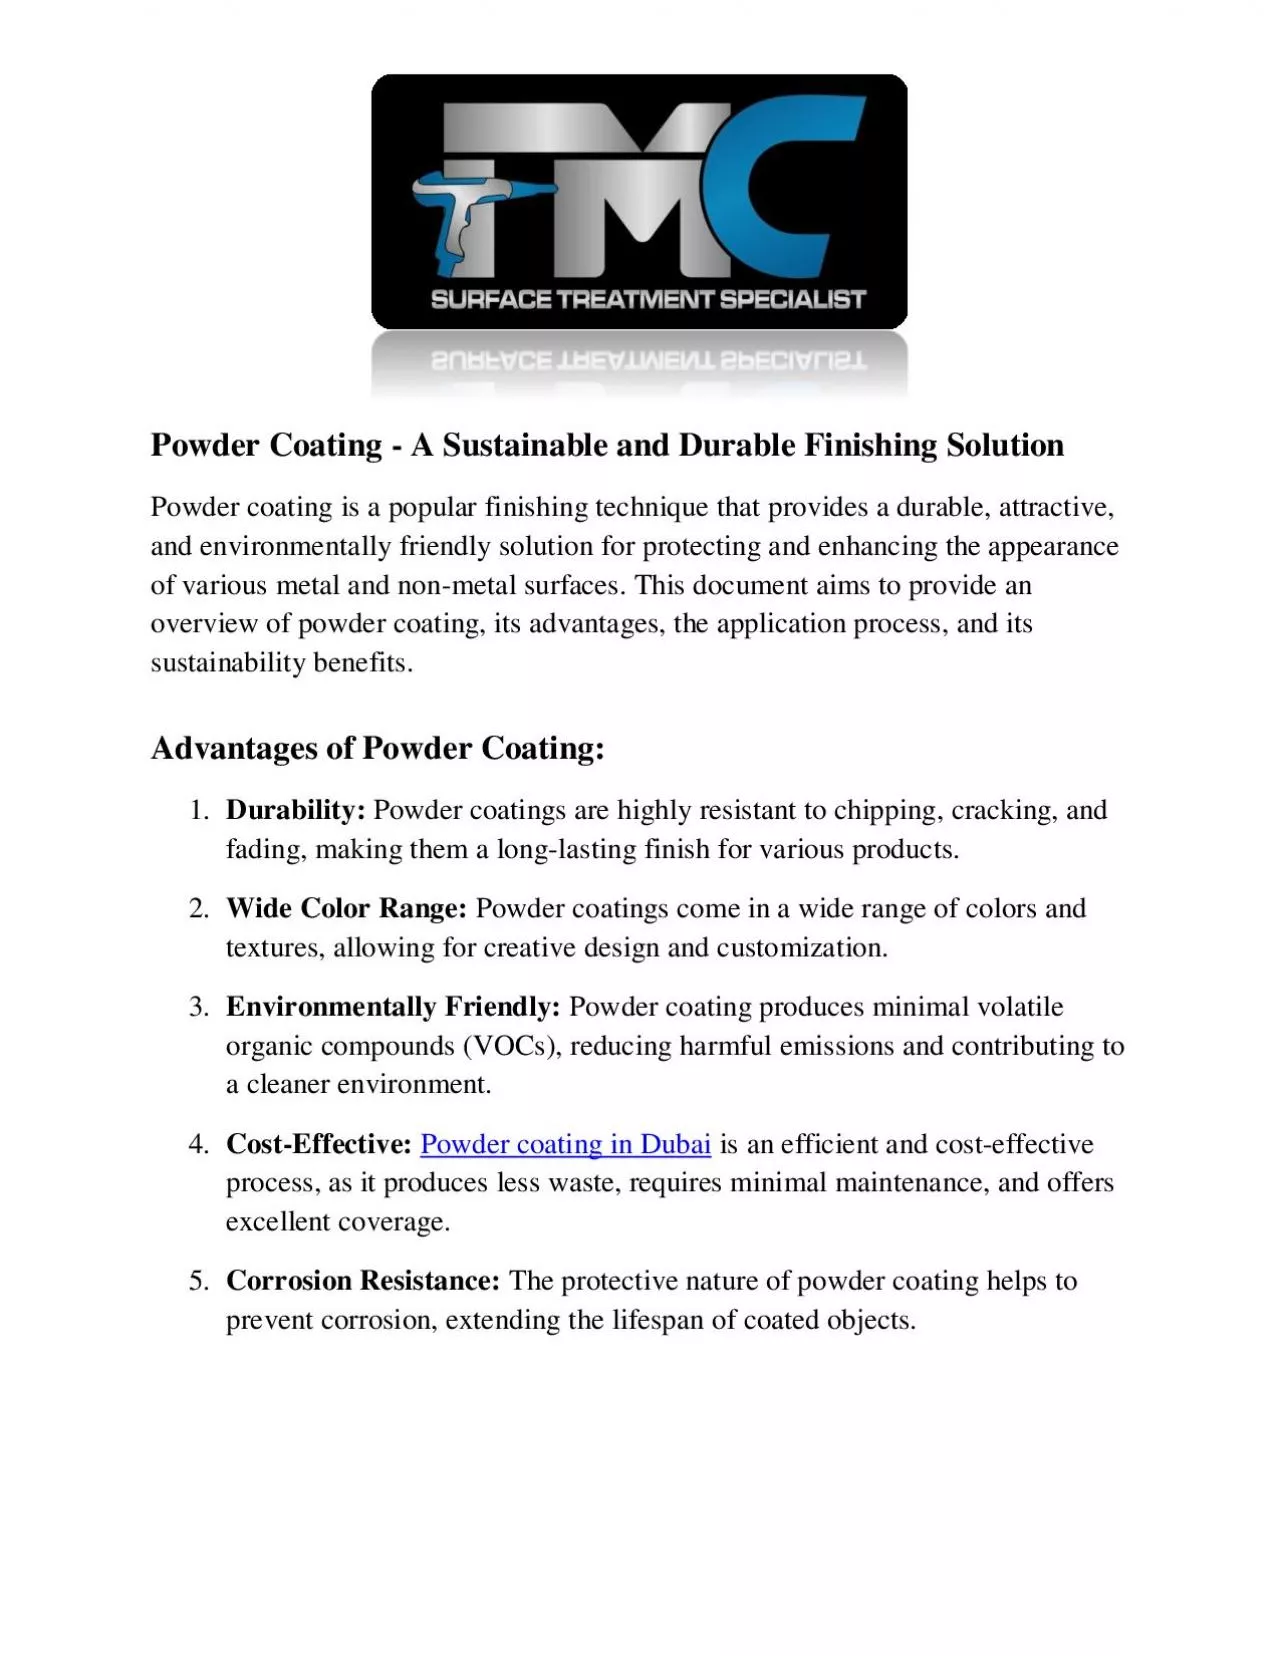 Powder Coating - A Sustainable and Durable Finishing Solution